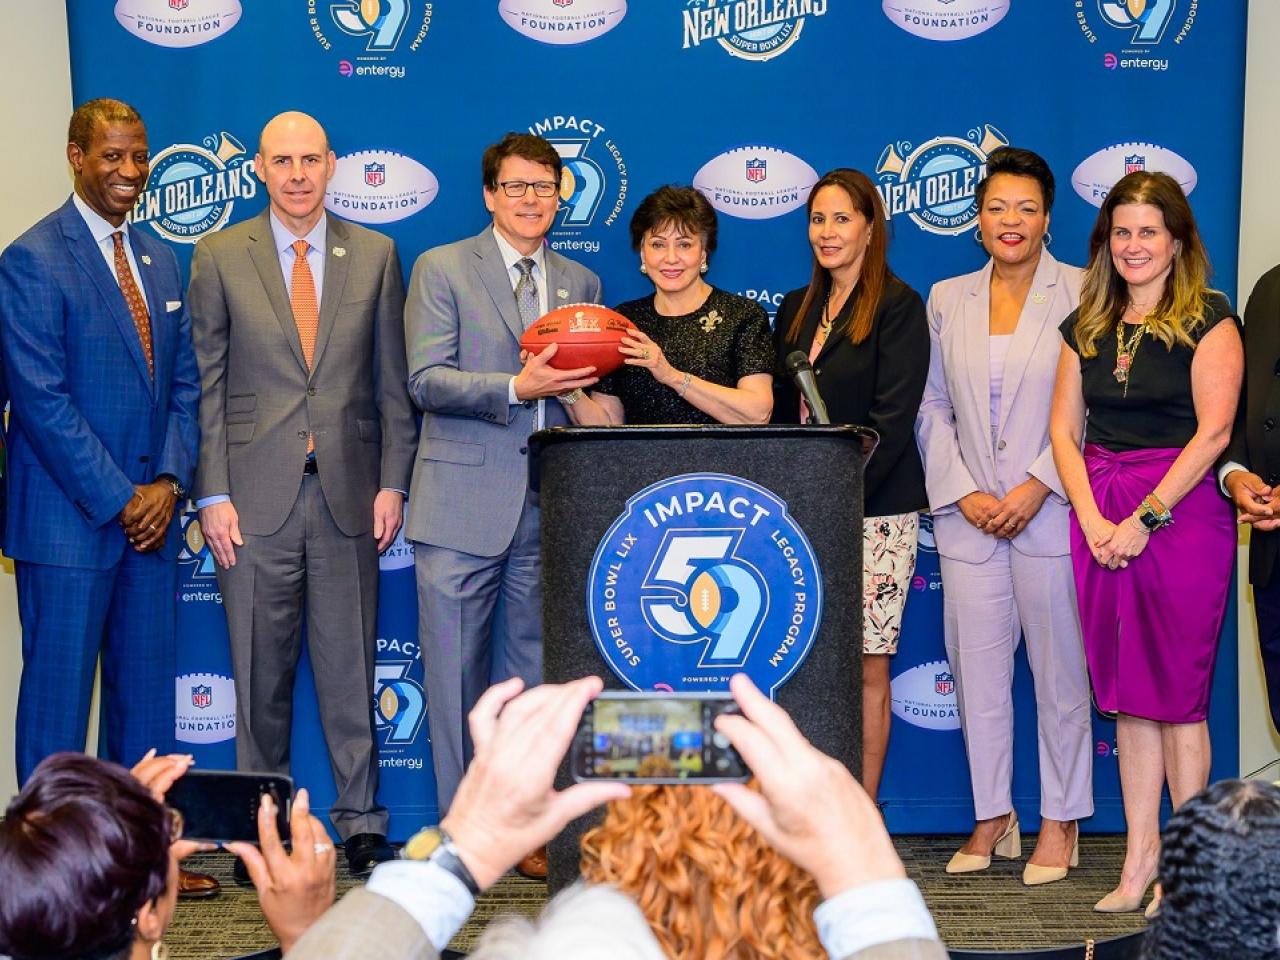 People on a stage behind a podium holding a football